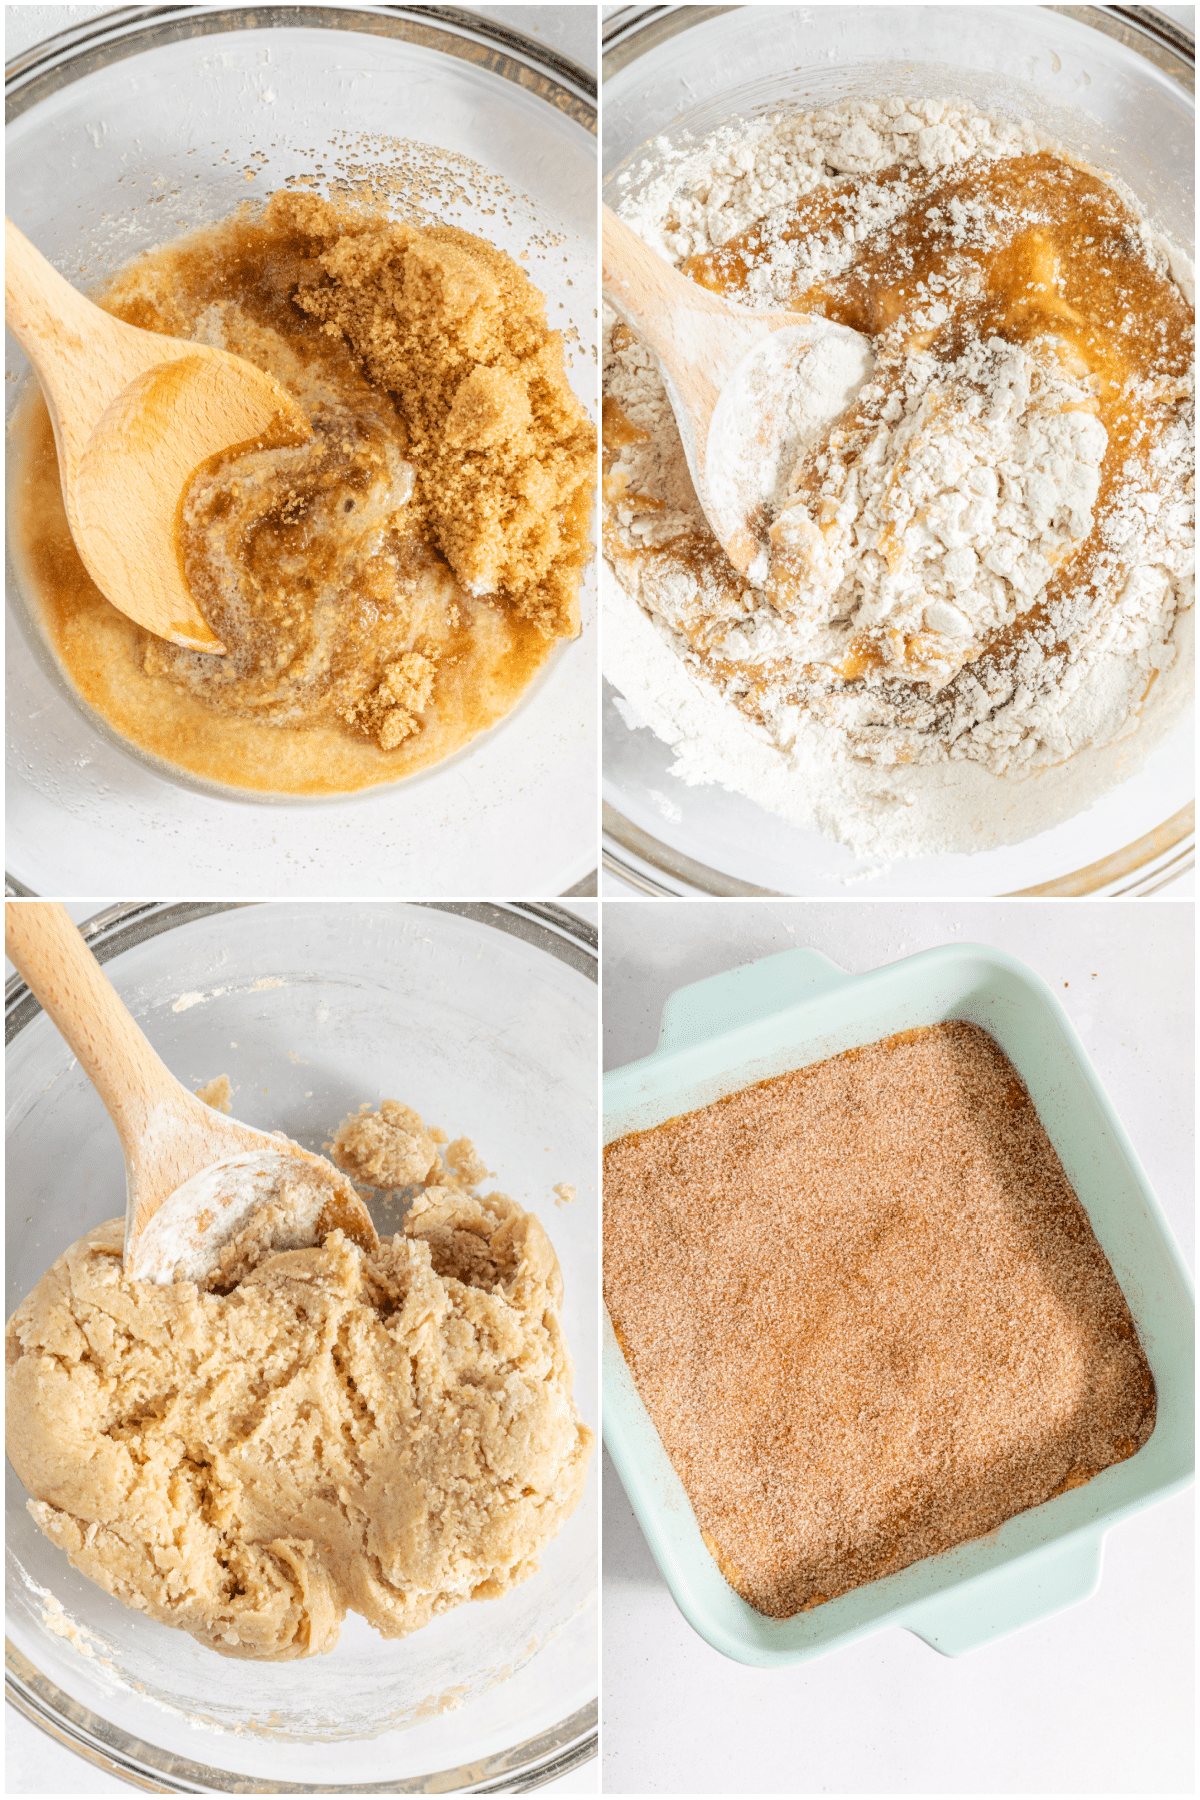 A four photo collage showing how to make snickerdoodle blondies: cream together butter and sugar, add dry ingredients, mix, spread evenly in baking dish, sprinkle with cinnamon sugar, bake.